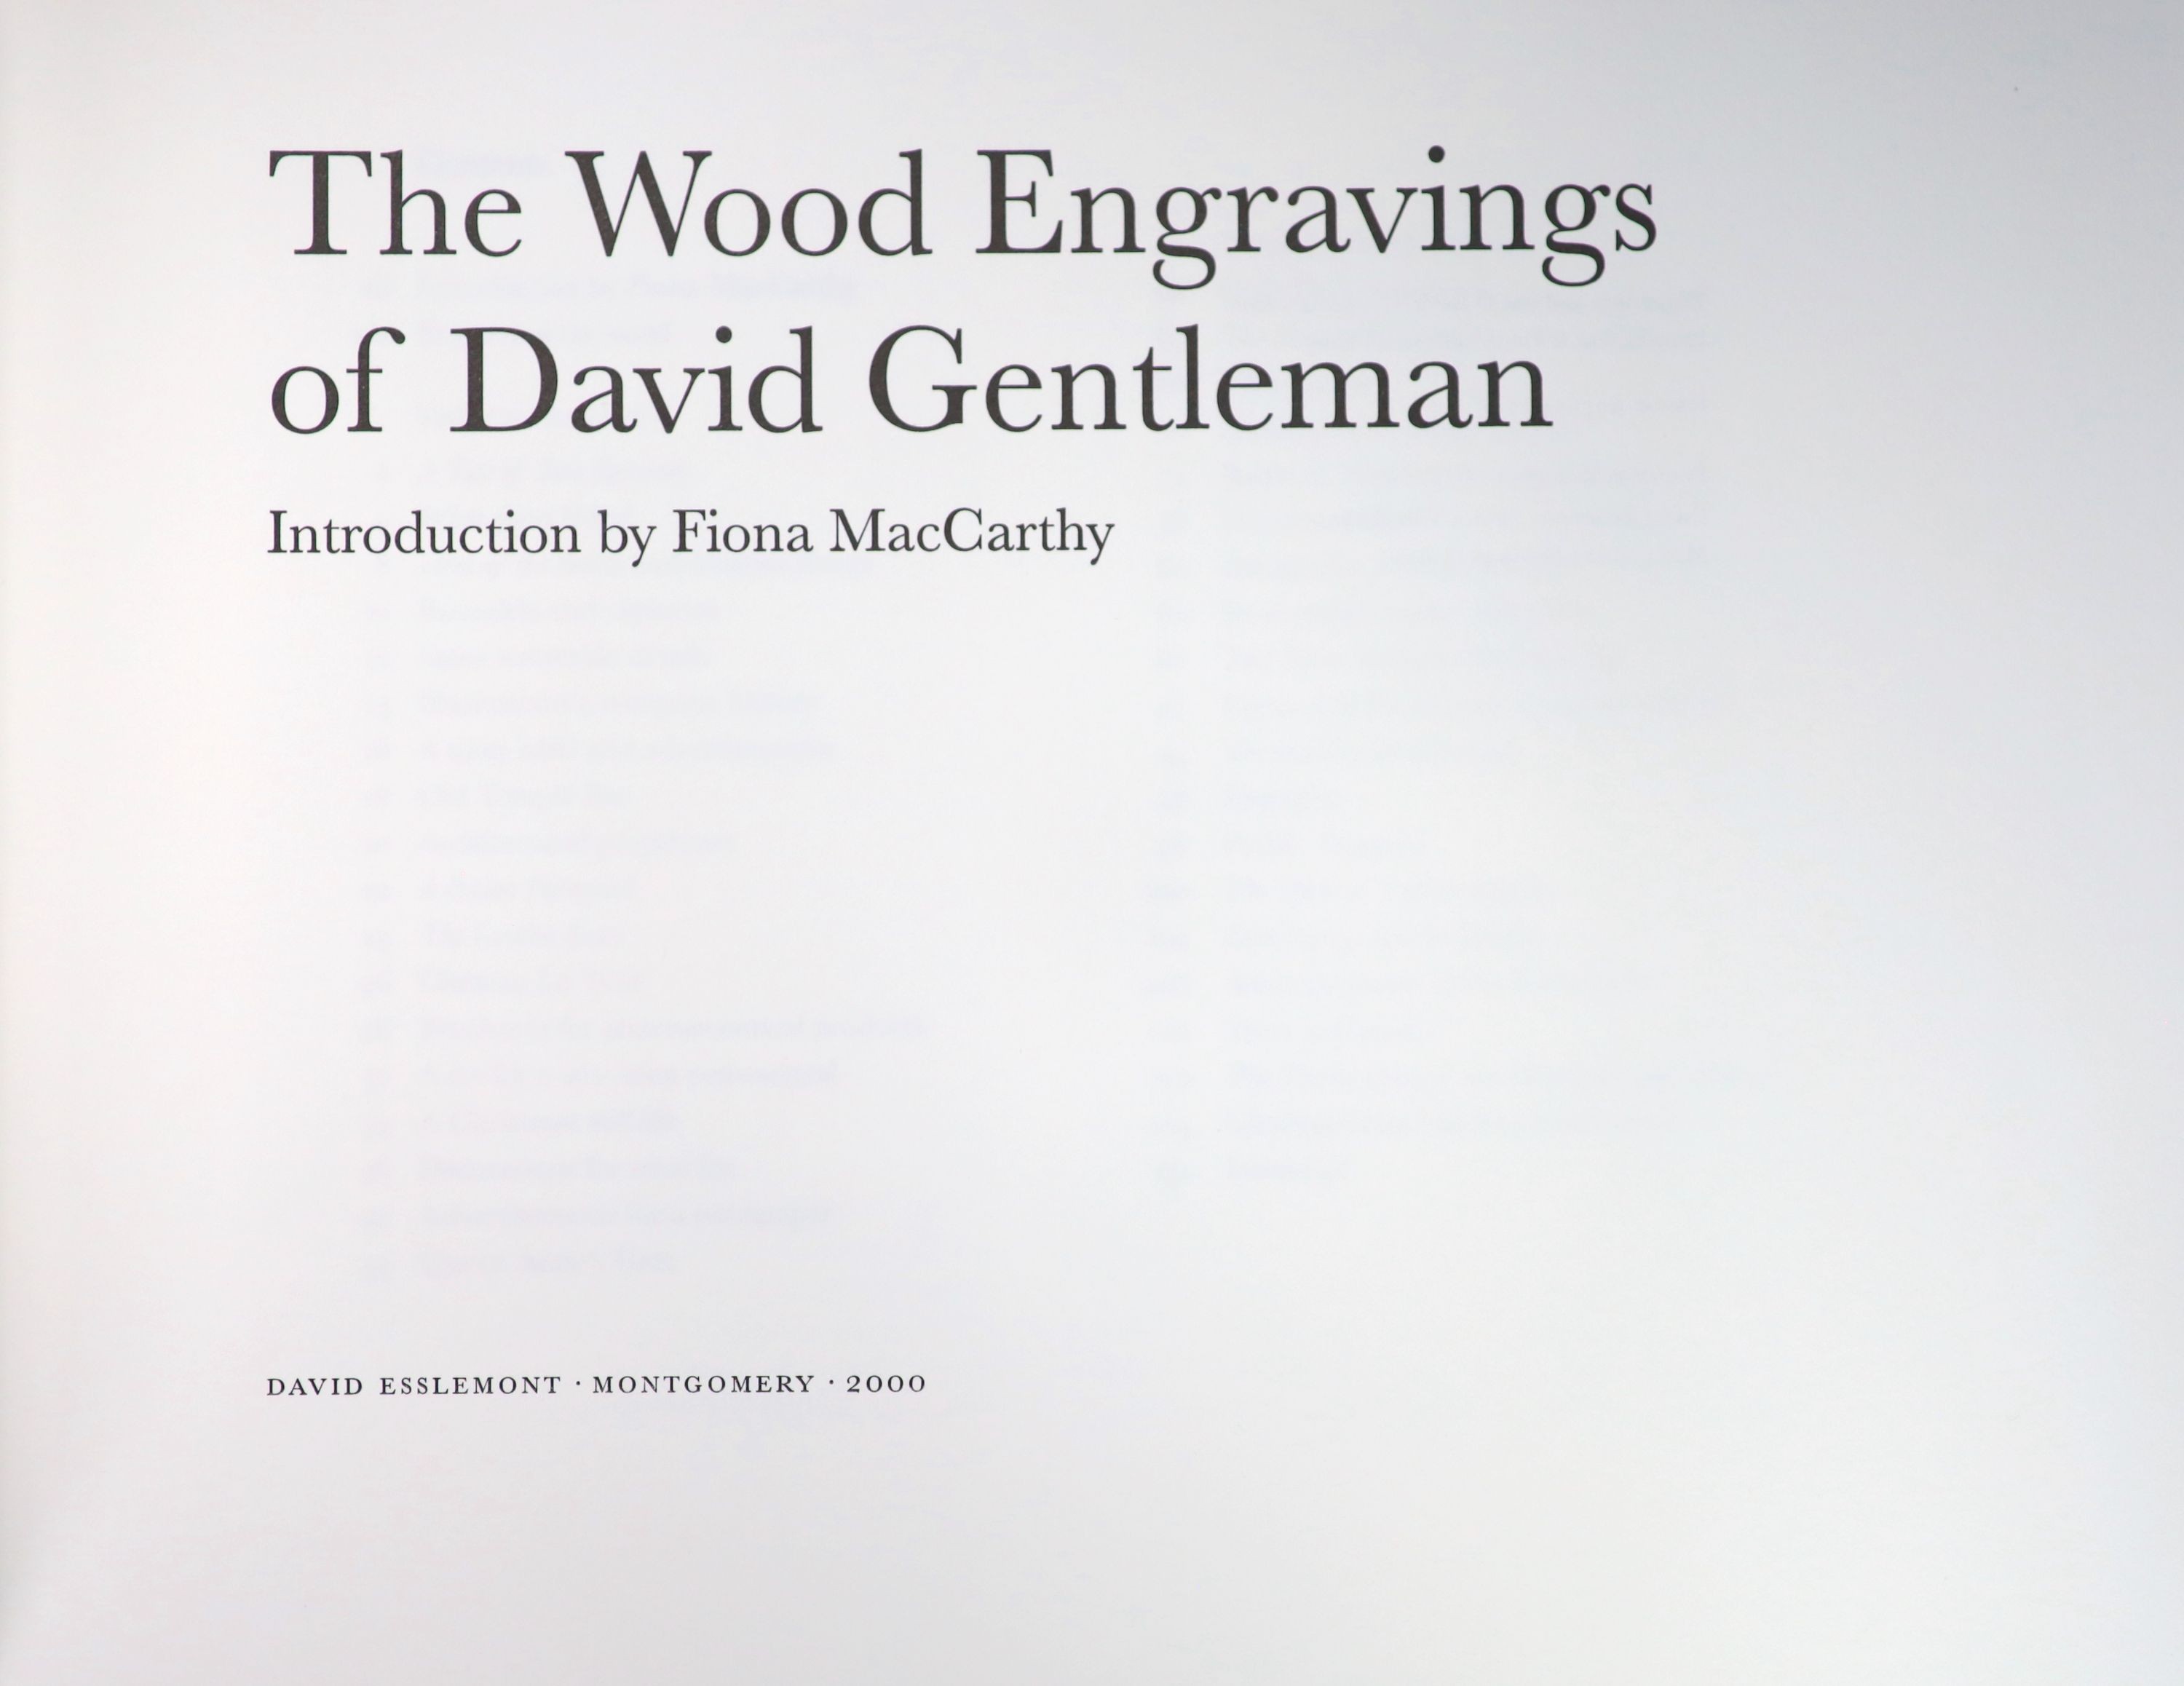 Gentleman, David - The Wood Engravings of David Gentleman, oblong folio, cloth, number 290 of 350, signed by the artist, introduction by Fiona MacCarthy, Montgomery, 2000, with slip case